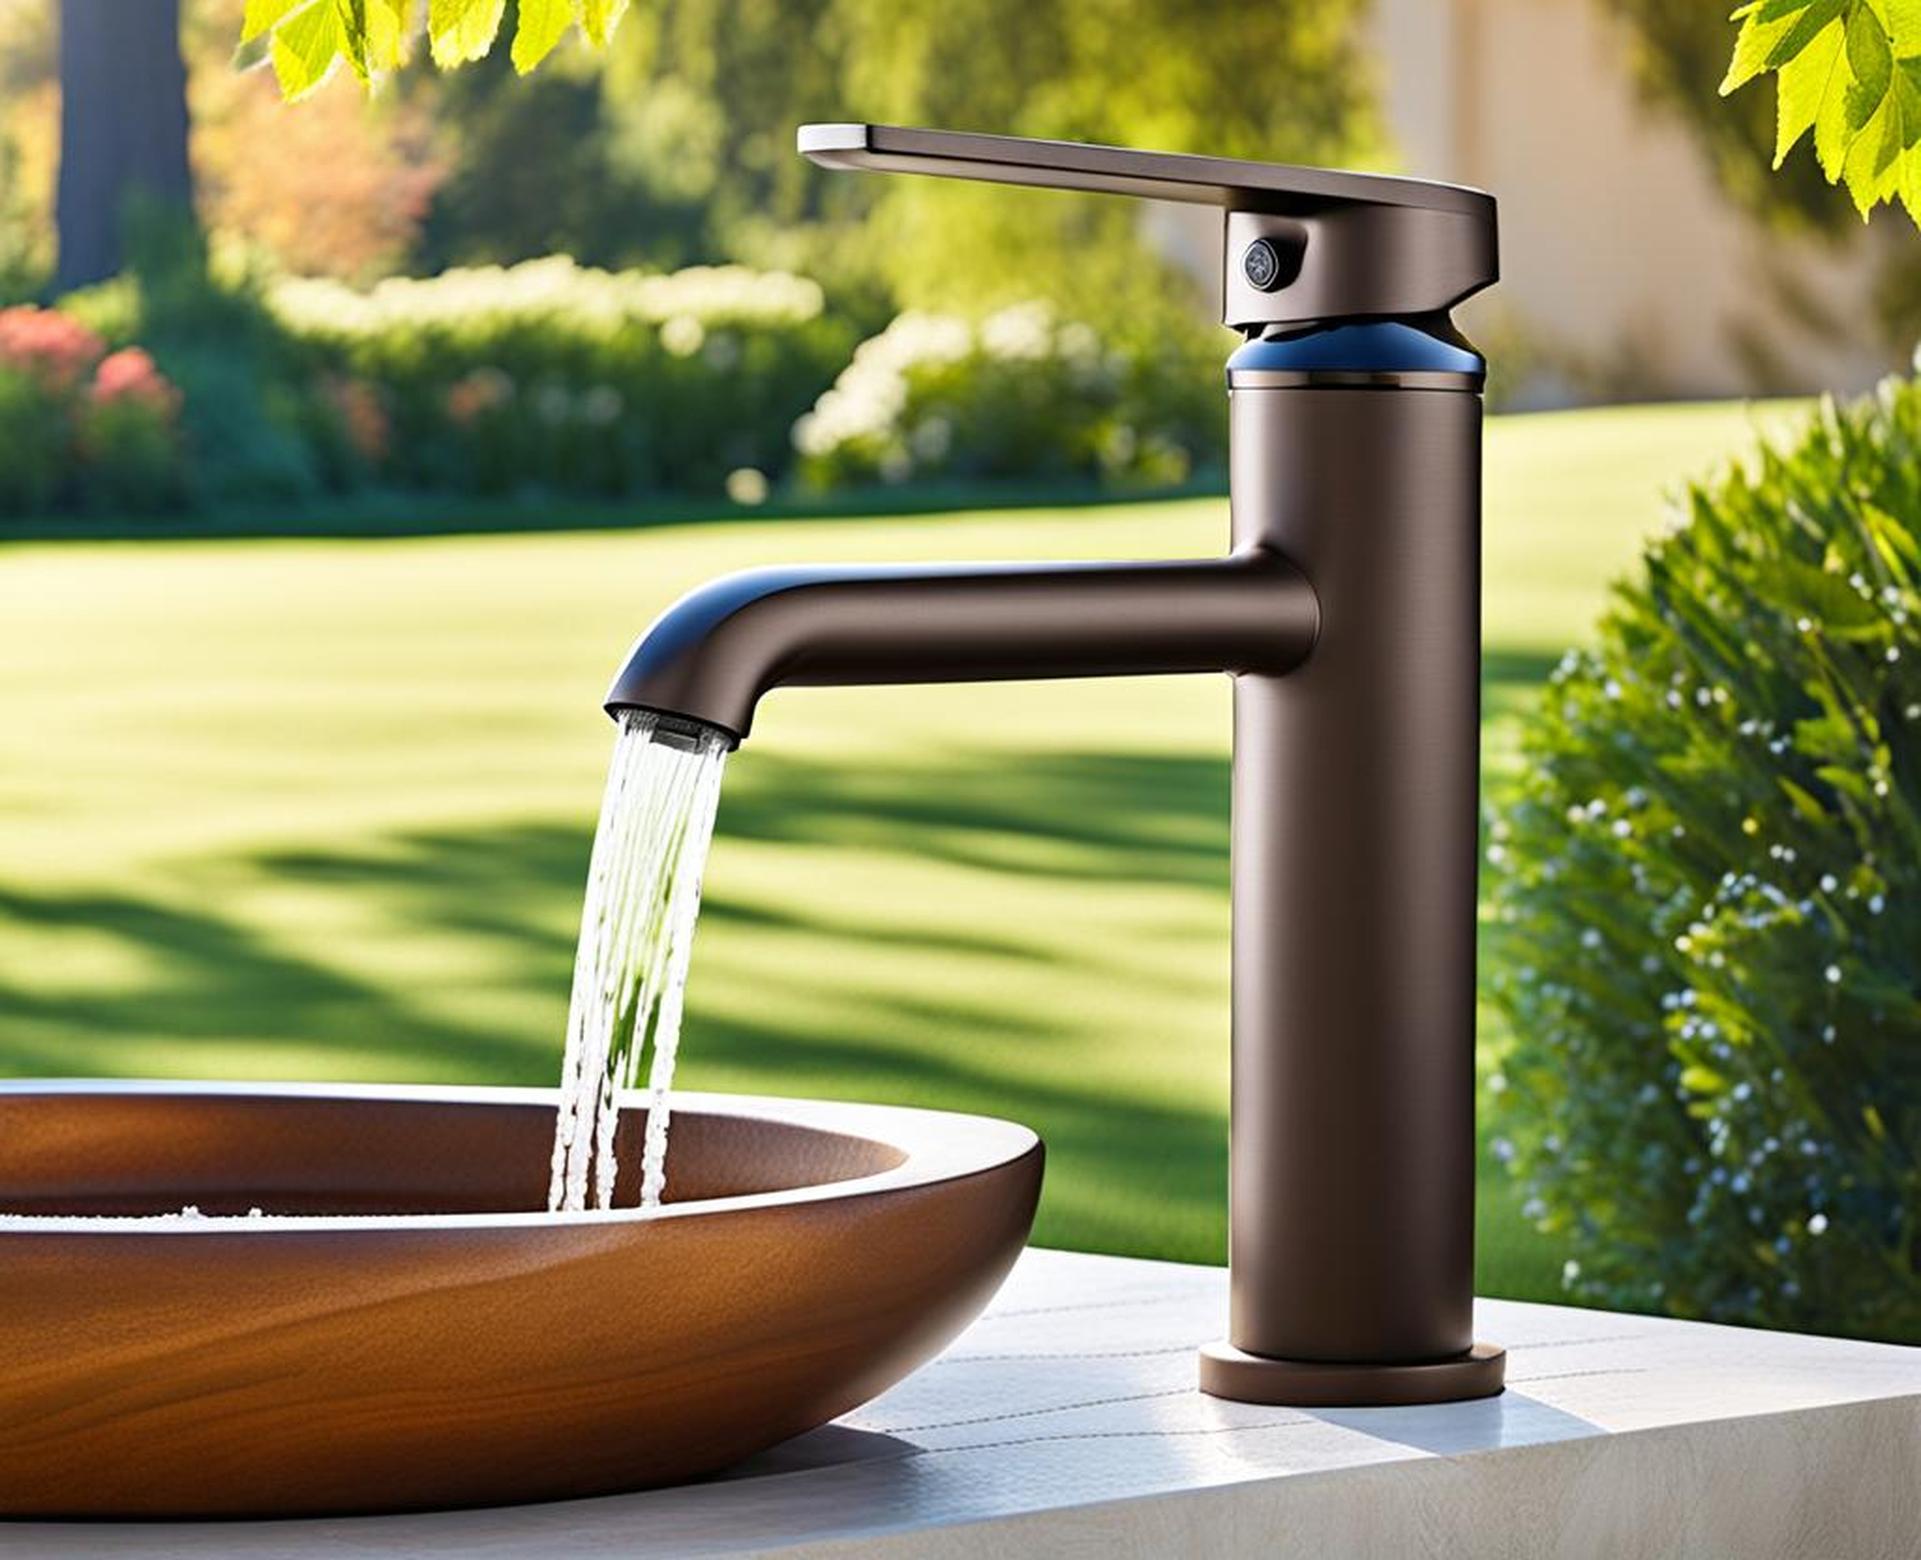 frost-free outdoor faucet types